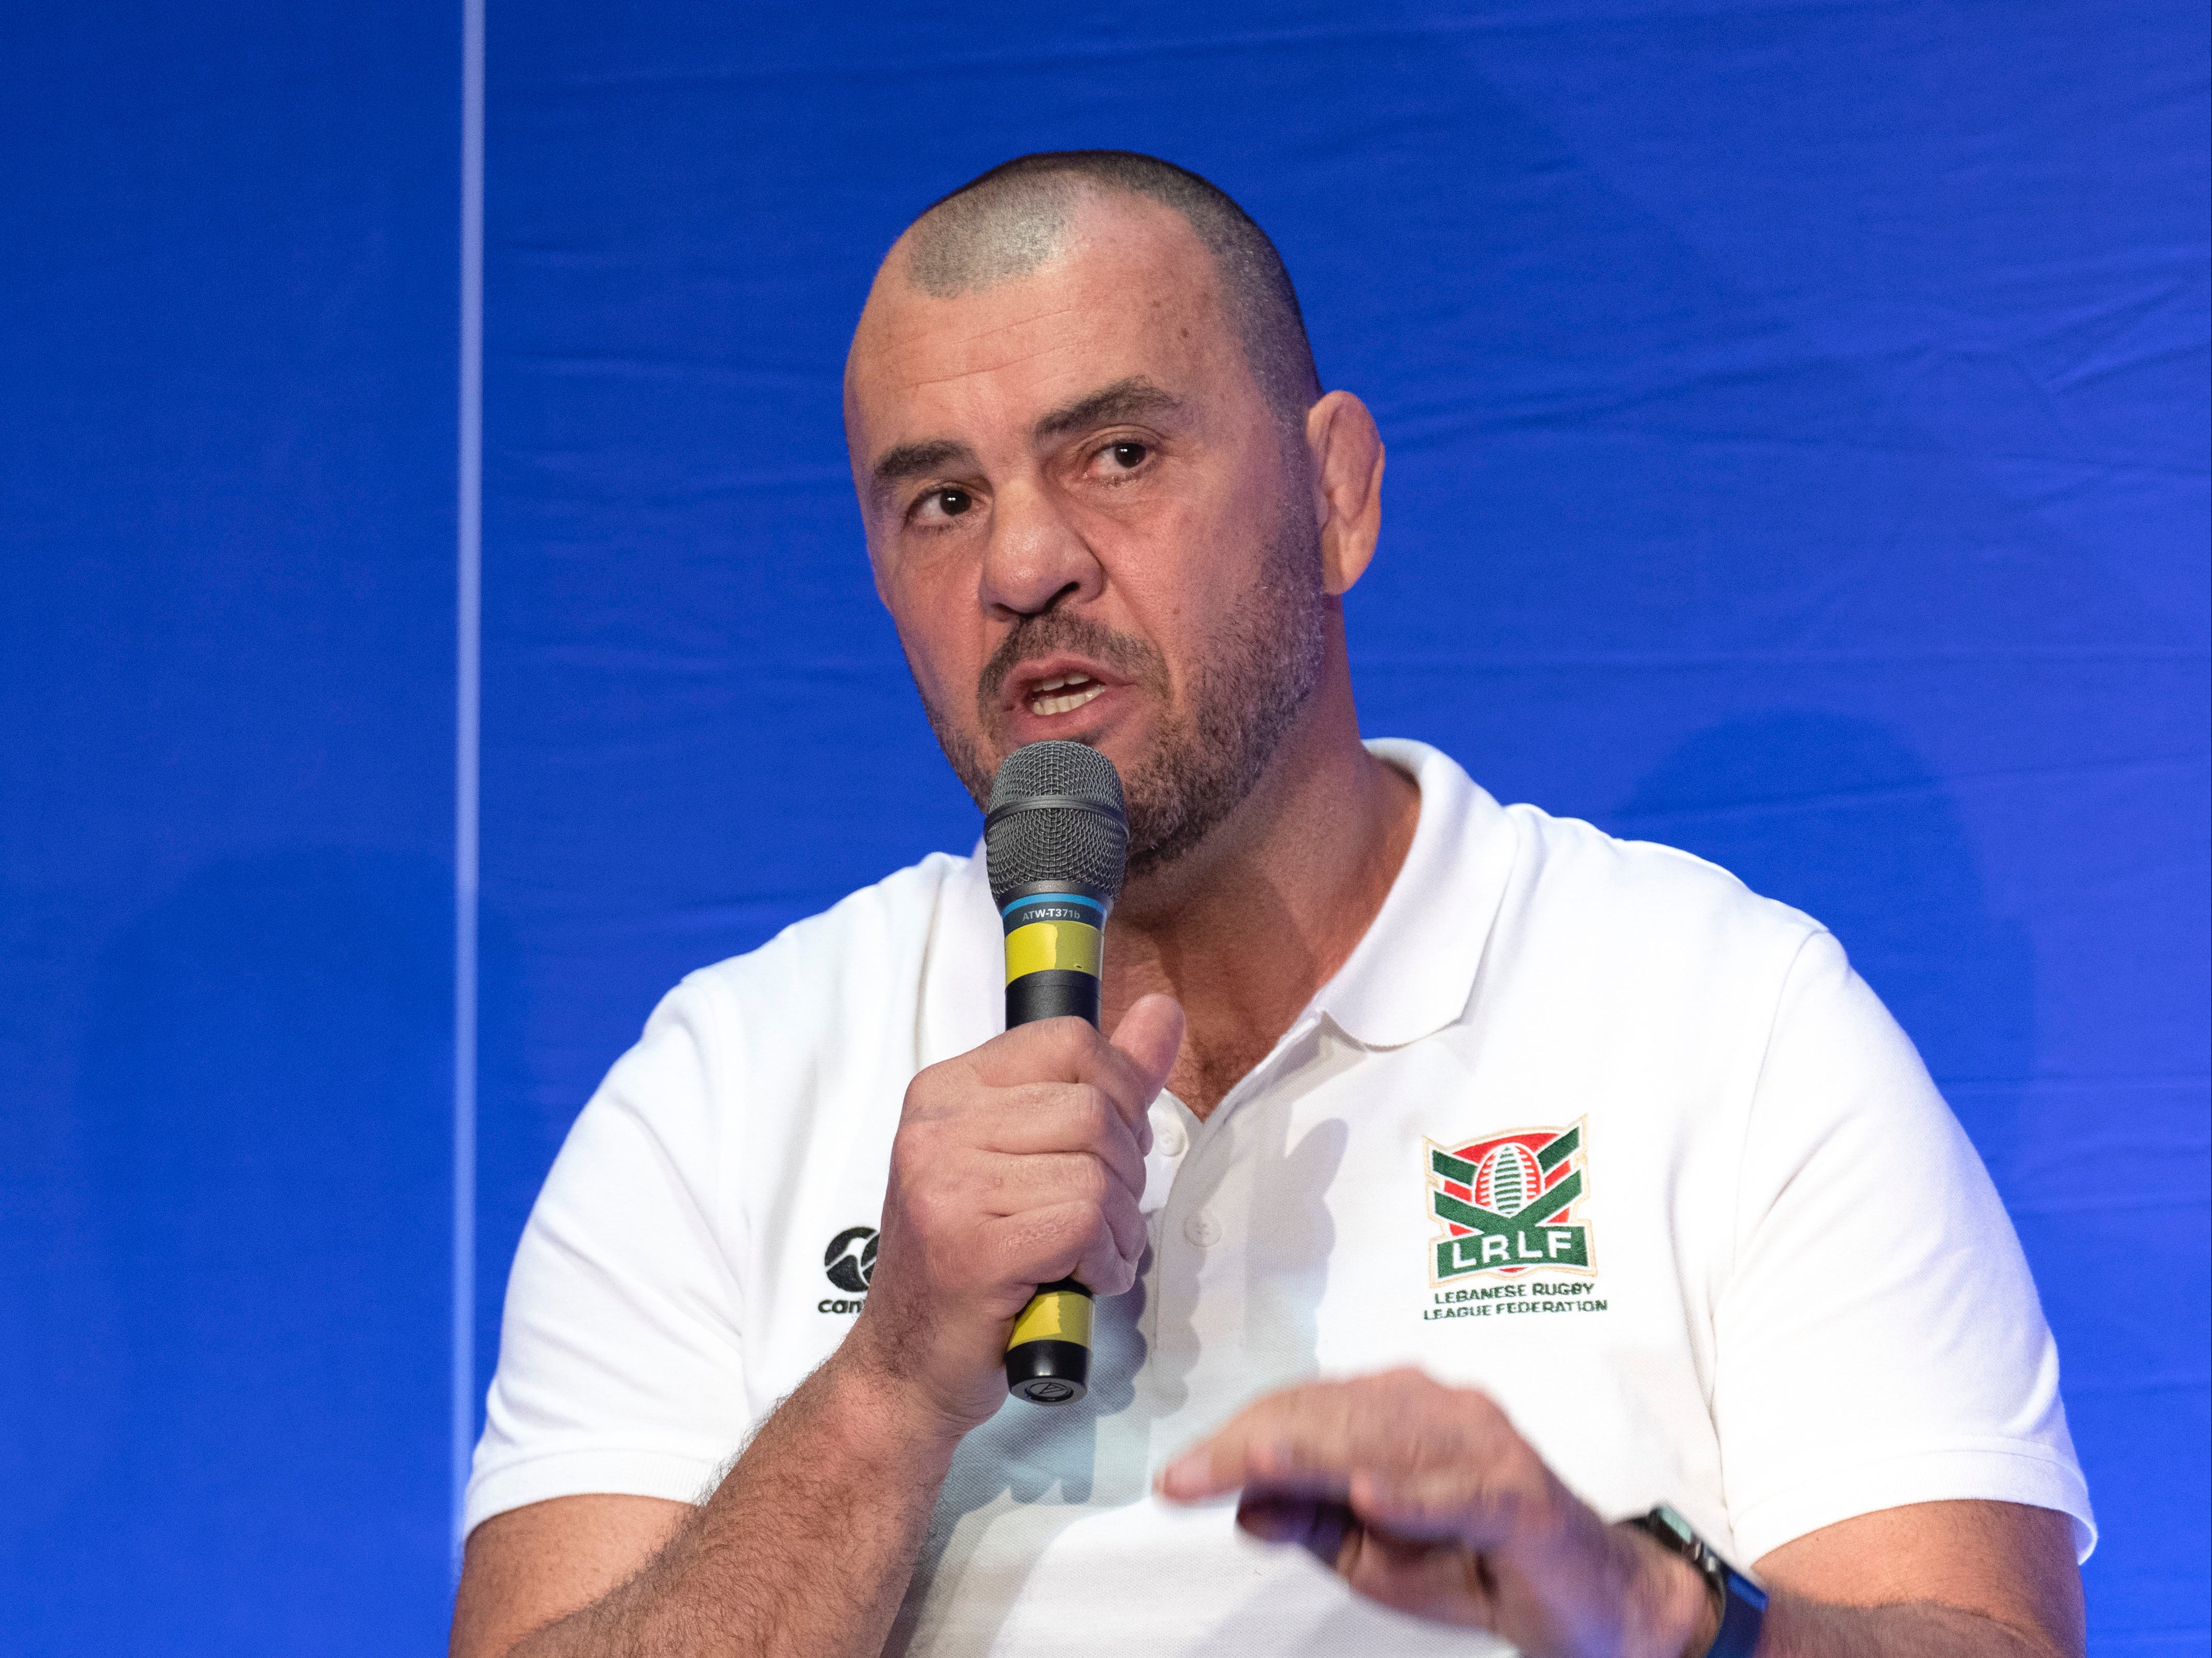 Cheika is also working with Argentina’s rugby union team and Japanese side Green Rockets